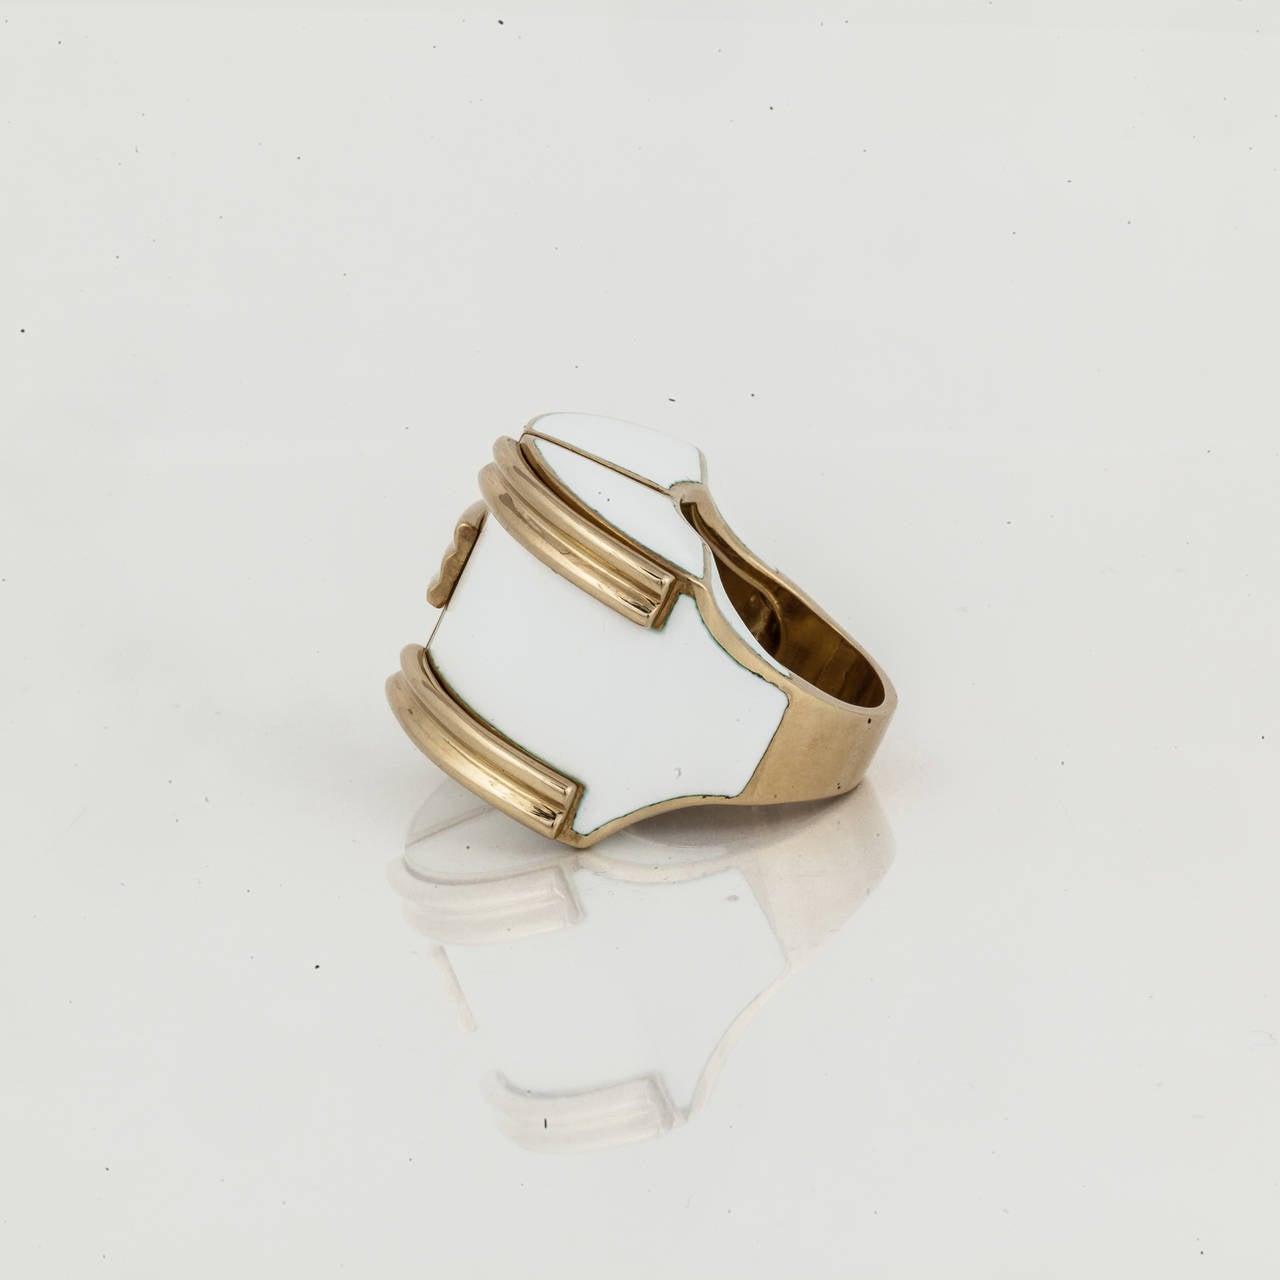 This vintage dome style ring by David Webb is composed of 18K yellow gold with white enamel.  It is marked 